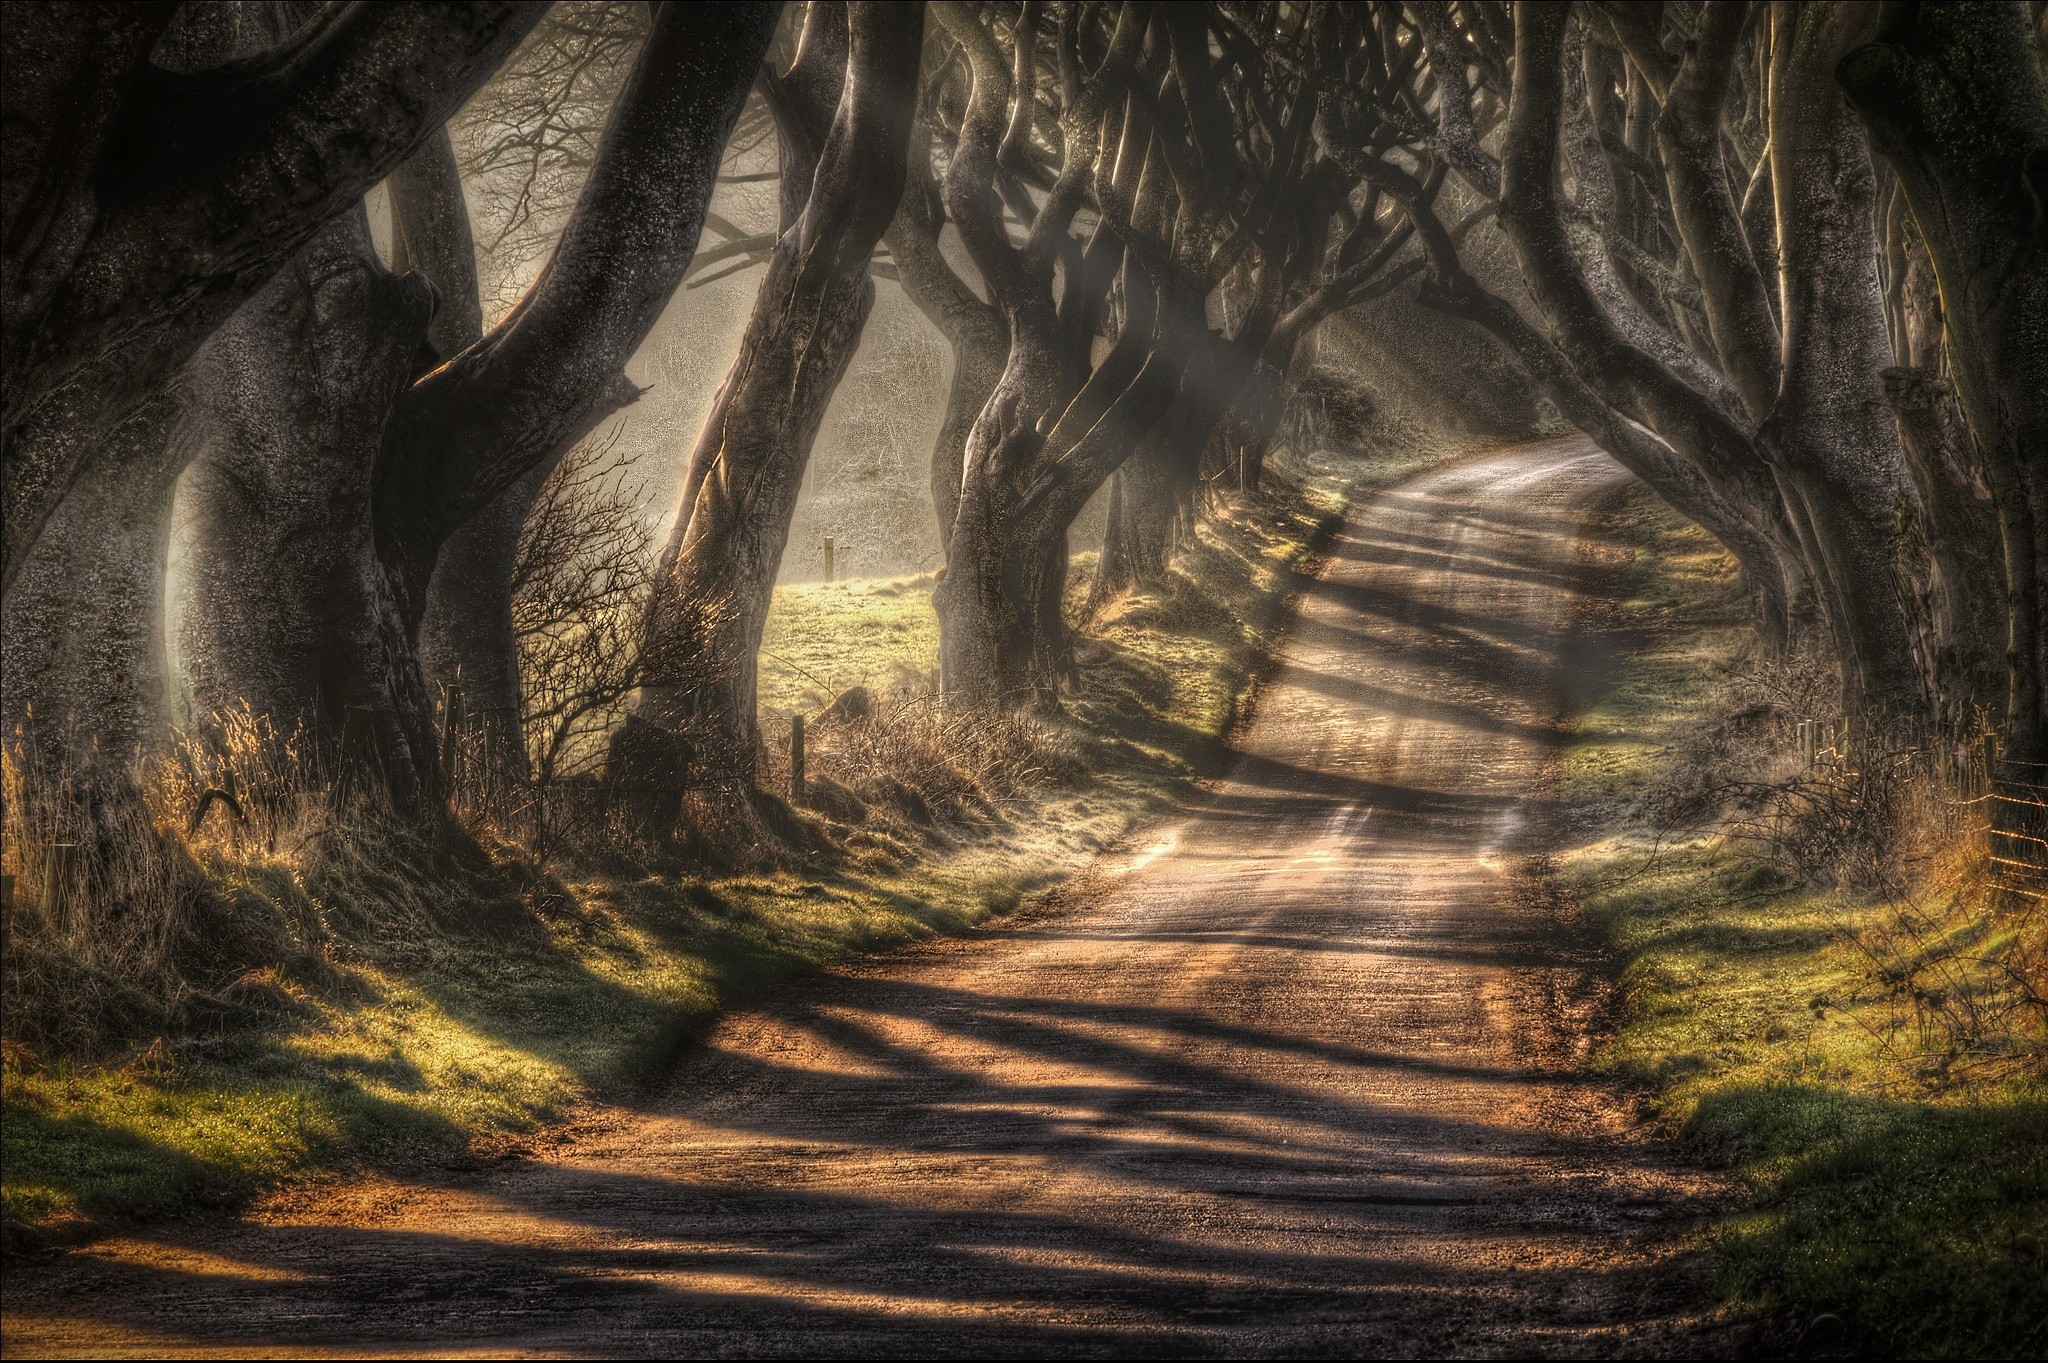 General 2048x1363 landscape sunlight road nature trees HDR fence sun rays dirt road tunnel of trees